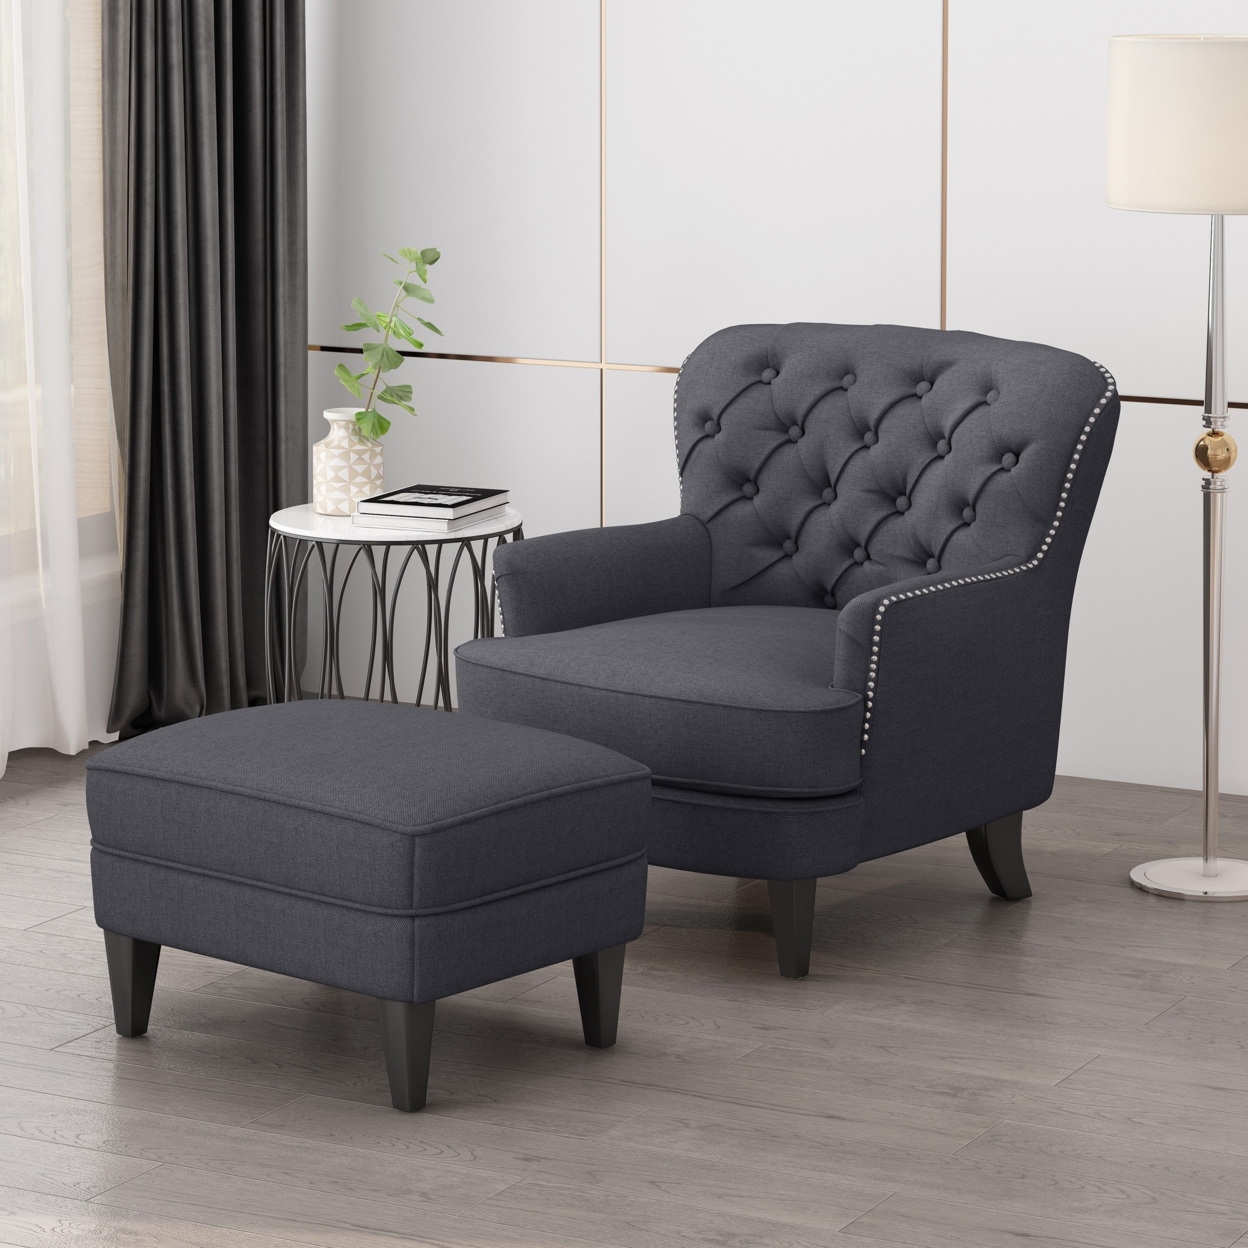 Jaxen Contemporary Tufted Fabric Club Chair And Ottoman Set - Gray